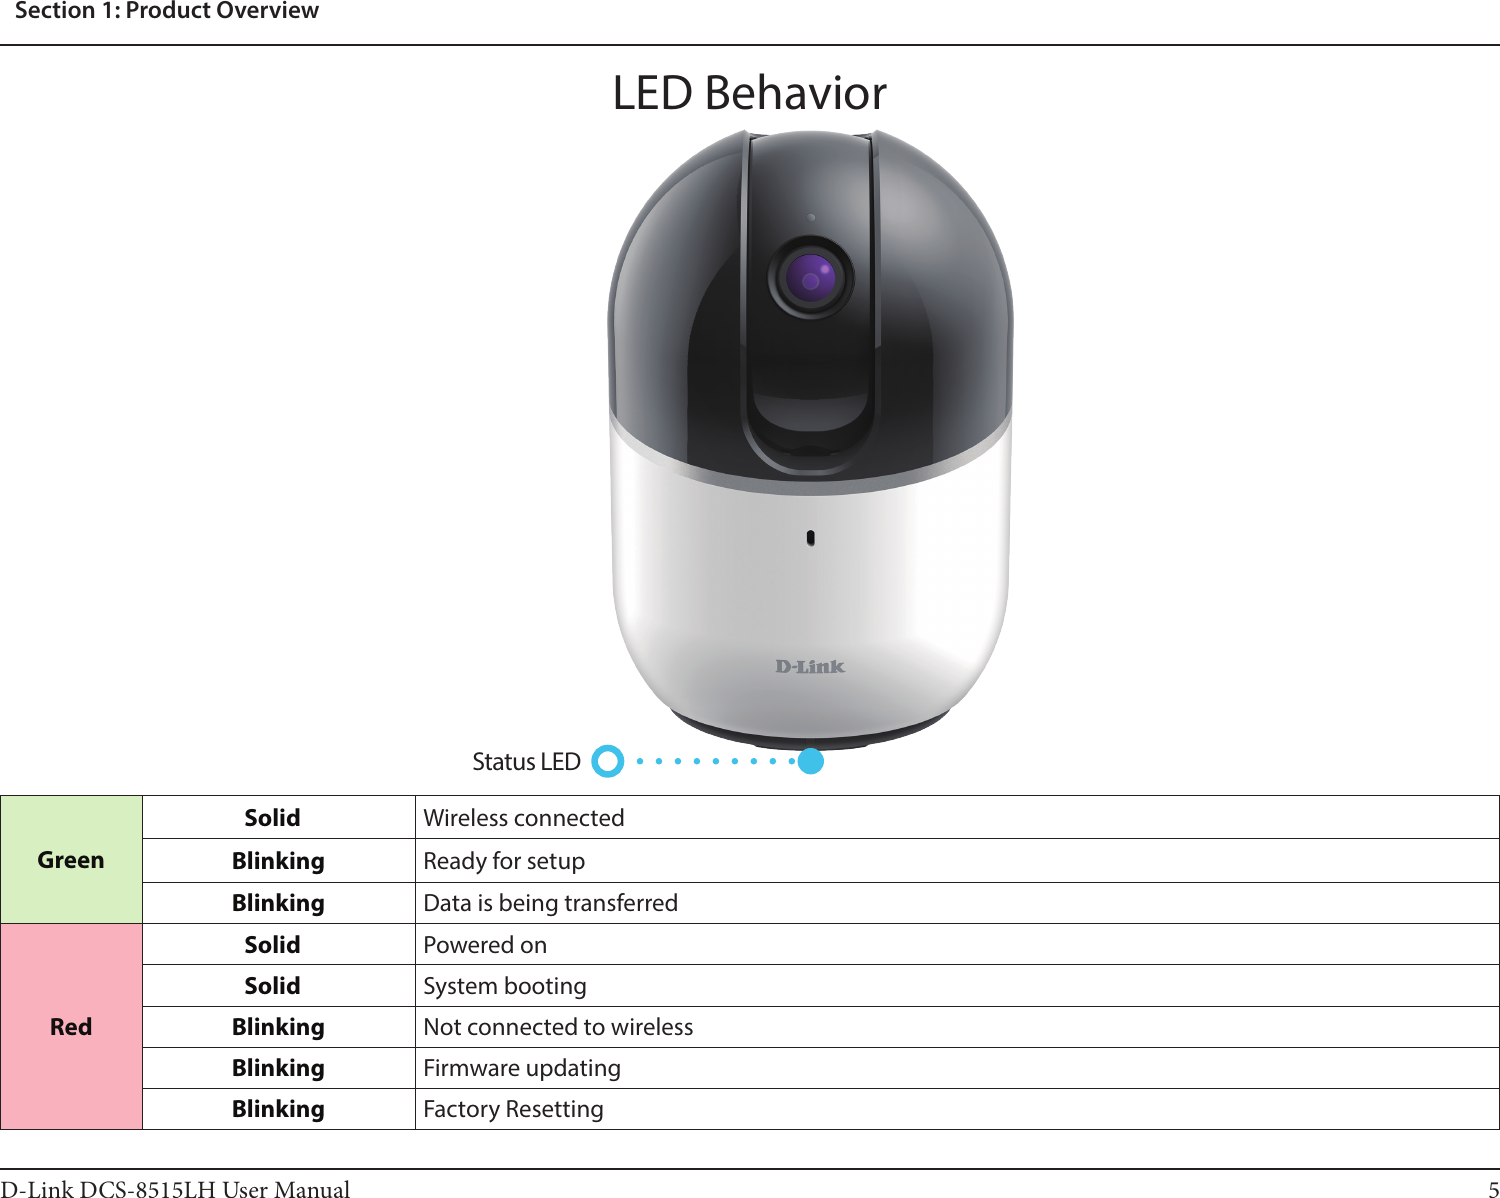 5D-Link DCS-8515LH User ManualSection 1: Product OverviewLED BehaviorGreenSolid Wireless connectedBlinking Ready for setupBlinking Data is being transferredRedSolid Powered onSolid System bootingBlinking Not connected to wirelessBlinking Firmware updatingBlinking Factory ResettingStatus LED